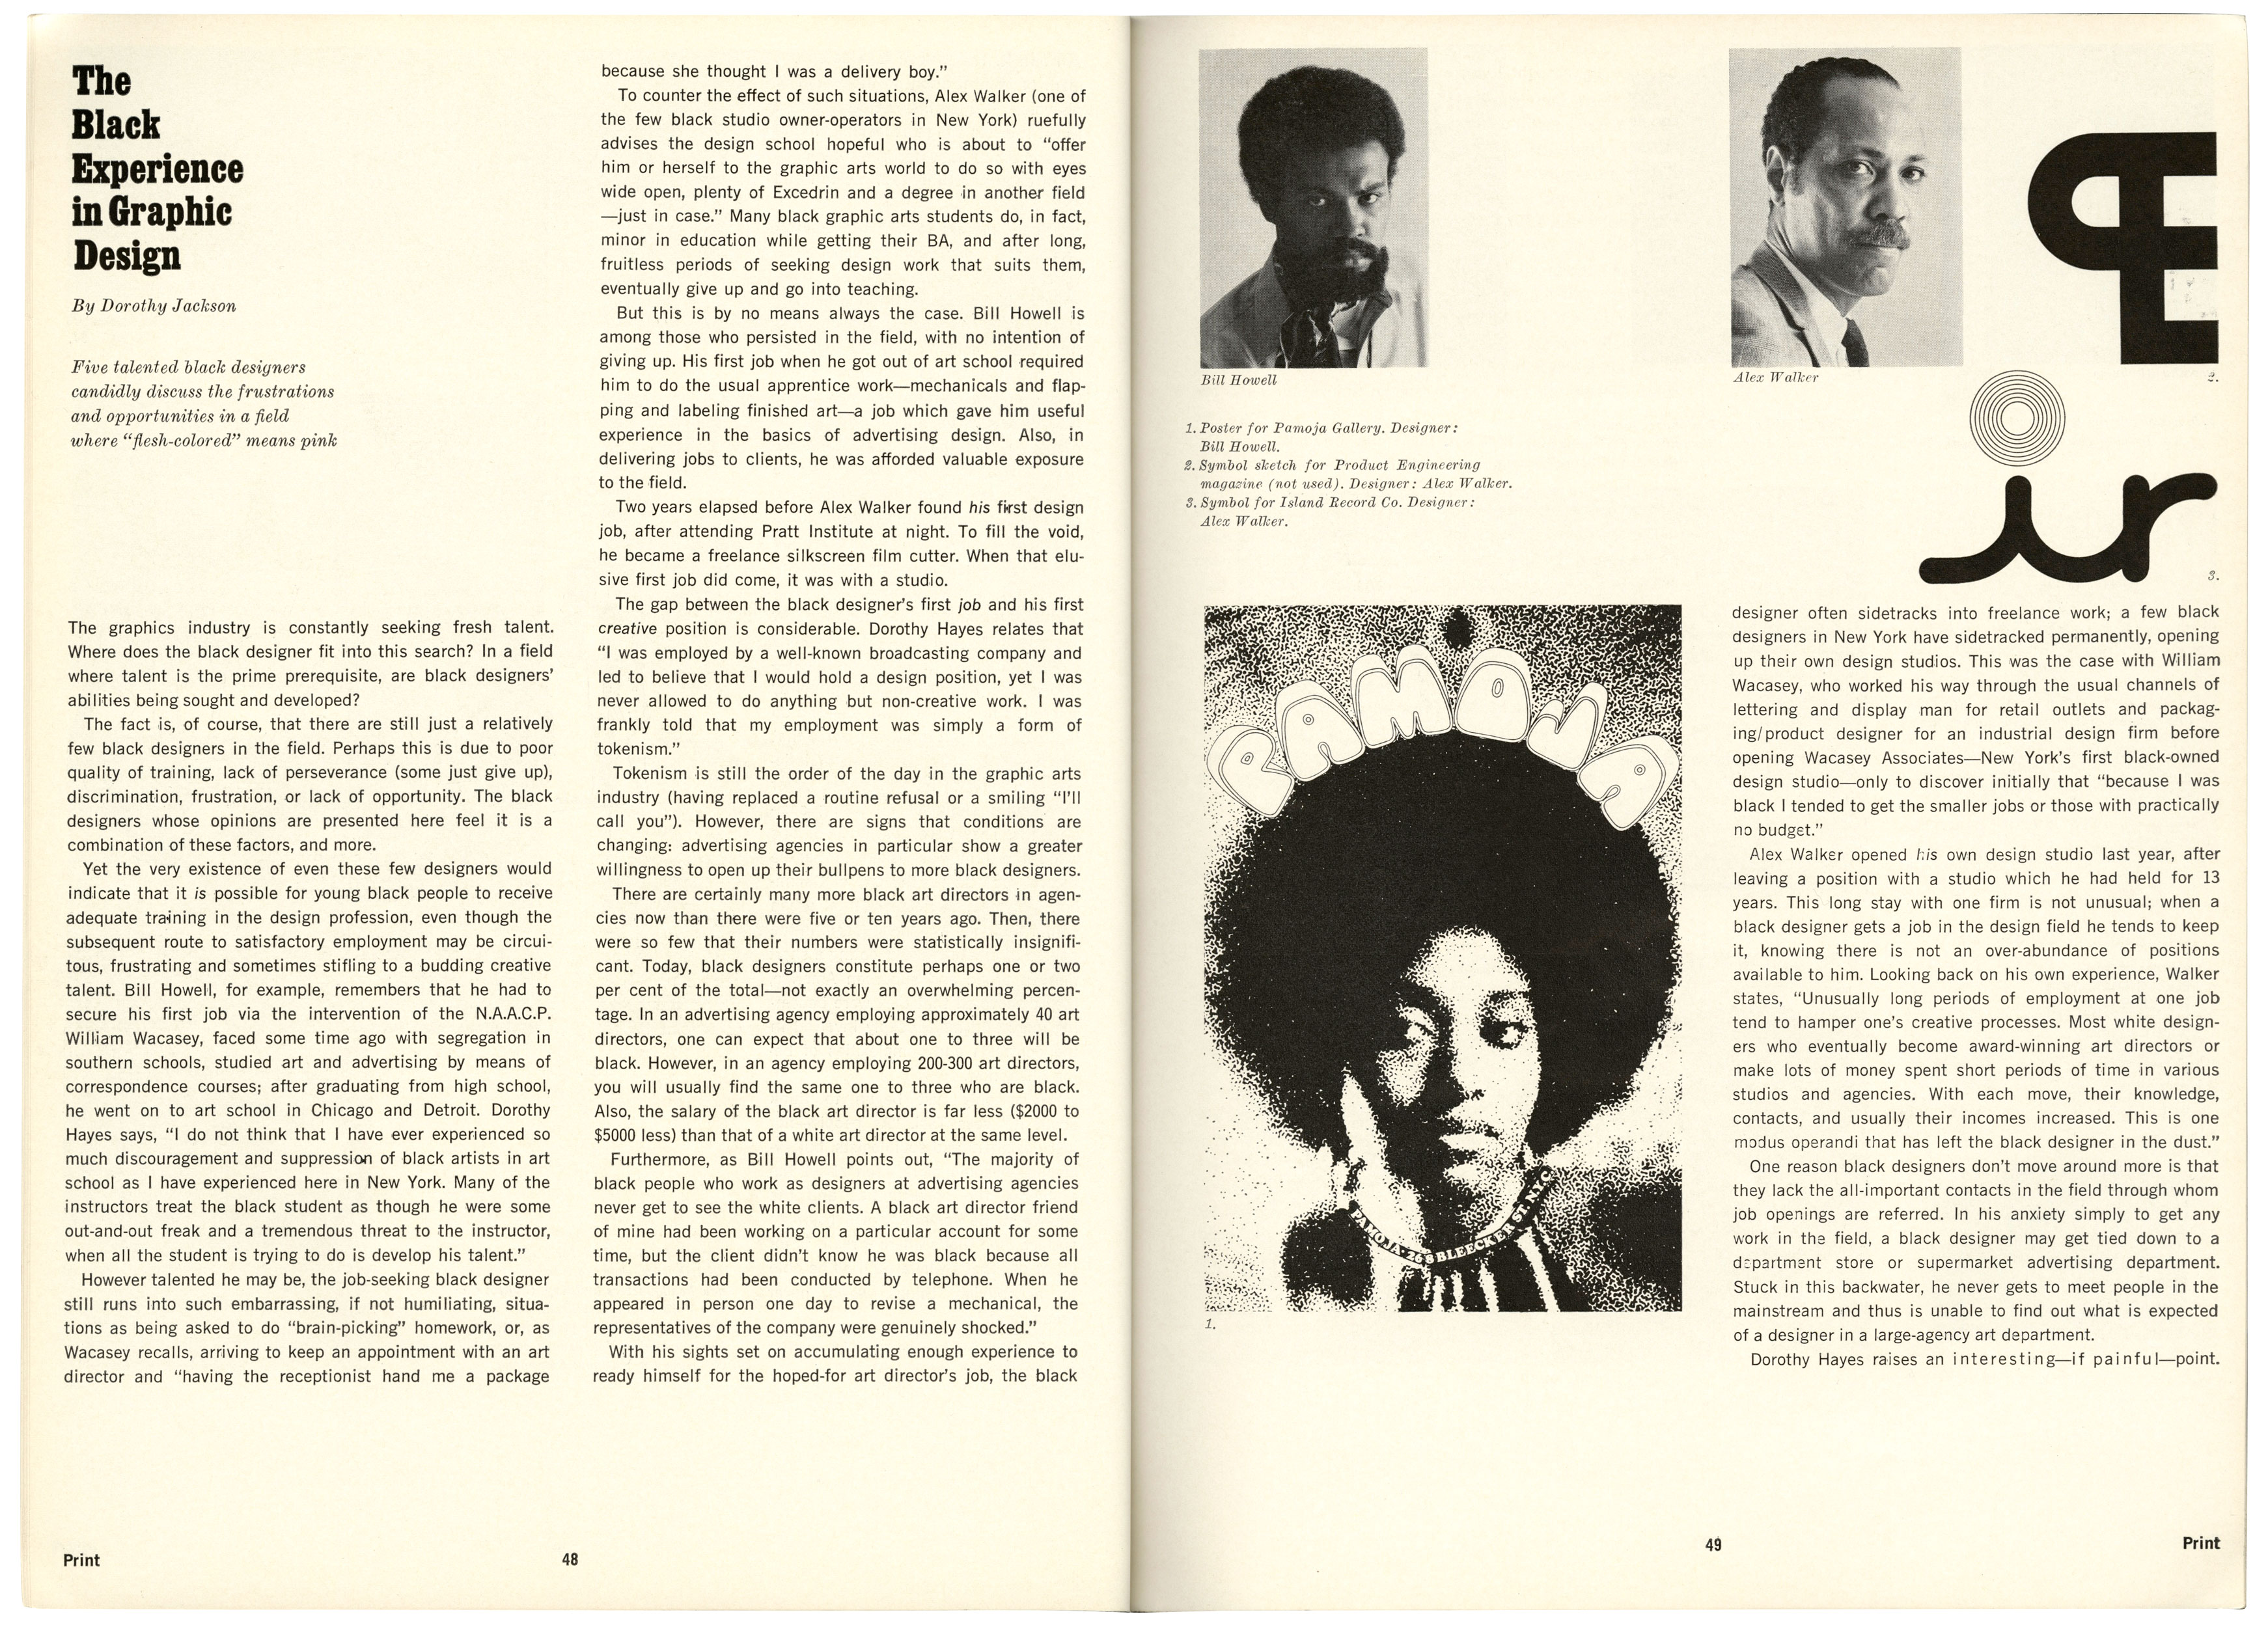 Print, The Black Experience in Graphic Design, 1968.